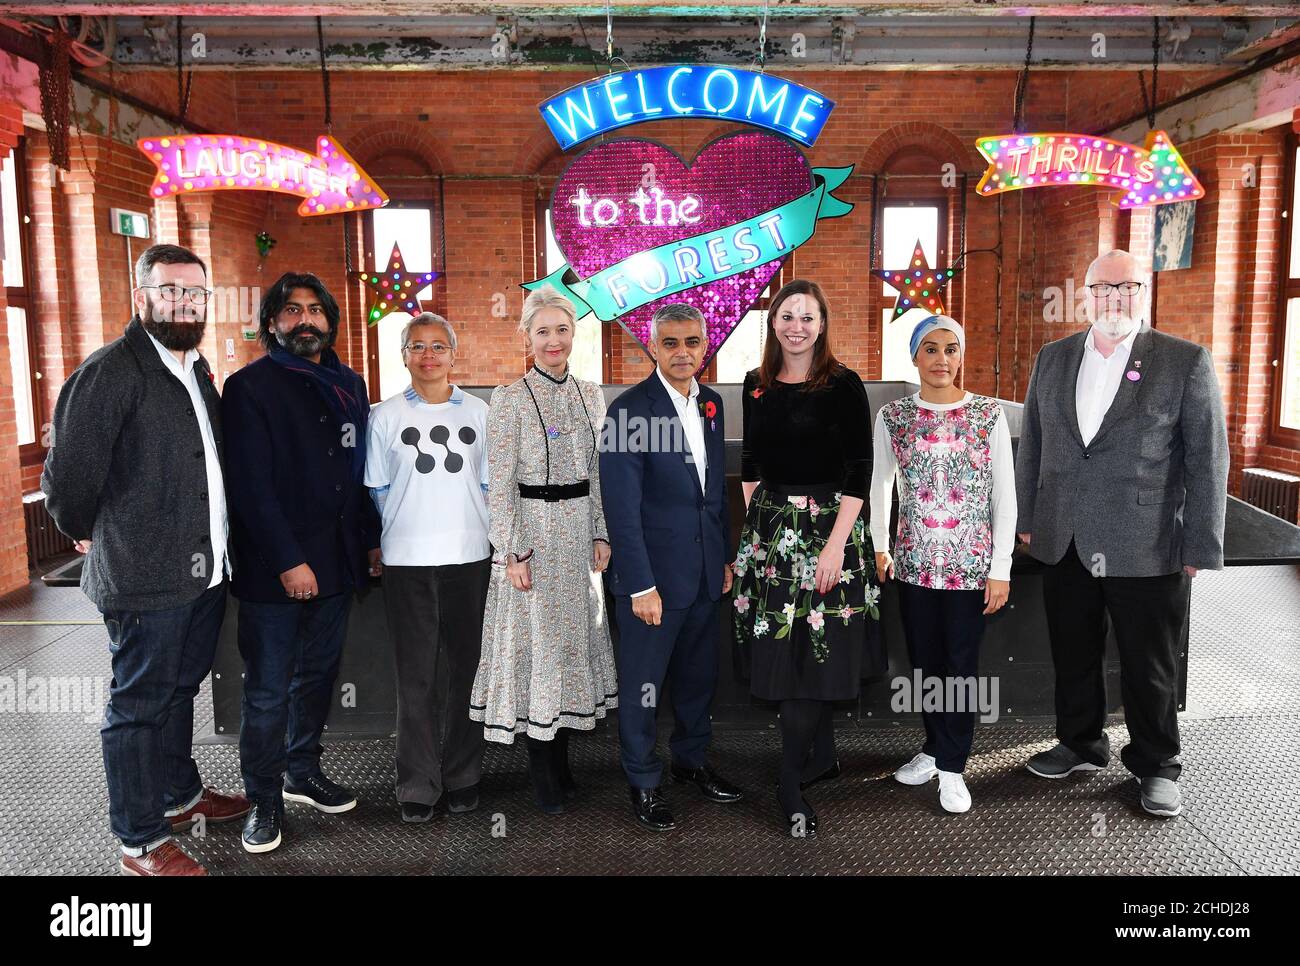 (Left to right) Sam Hunt, Creative Director, Talvin Singh, Belinda Calaguas, Justine Simons, Deputy Mayor for Culture and the Creative Industries, London Mayor Sadiq Khan, Cllr Clare Coghill, Leader of Waltham Forest Council, Zarah Hussain and Cllr Paul Douglas at a press conference to announce the programme for Waltham Forest London Borough of Culture 2019, London. PRESS ASSOCIATION. Photo. Picture date: Tuesday October 30, 2018. The London Borough of Culture award is a major new initiative launched by the Mayor of London, putting culture at the heart of local communities a Stock Photo